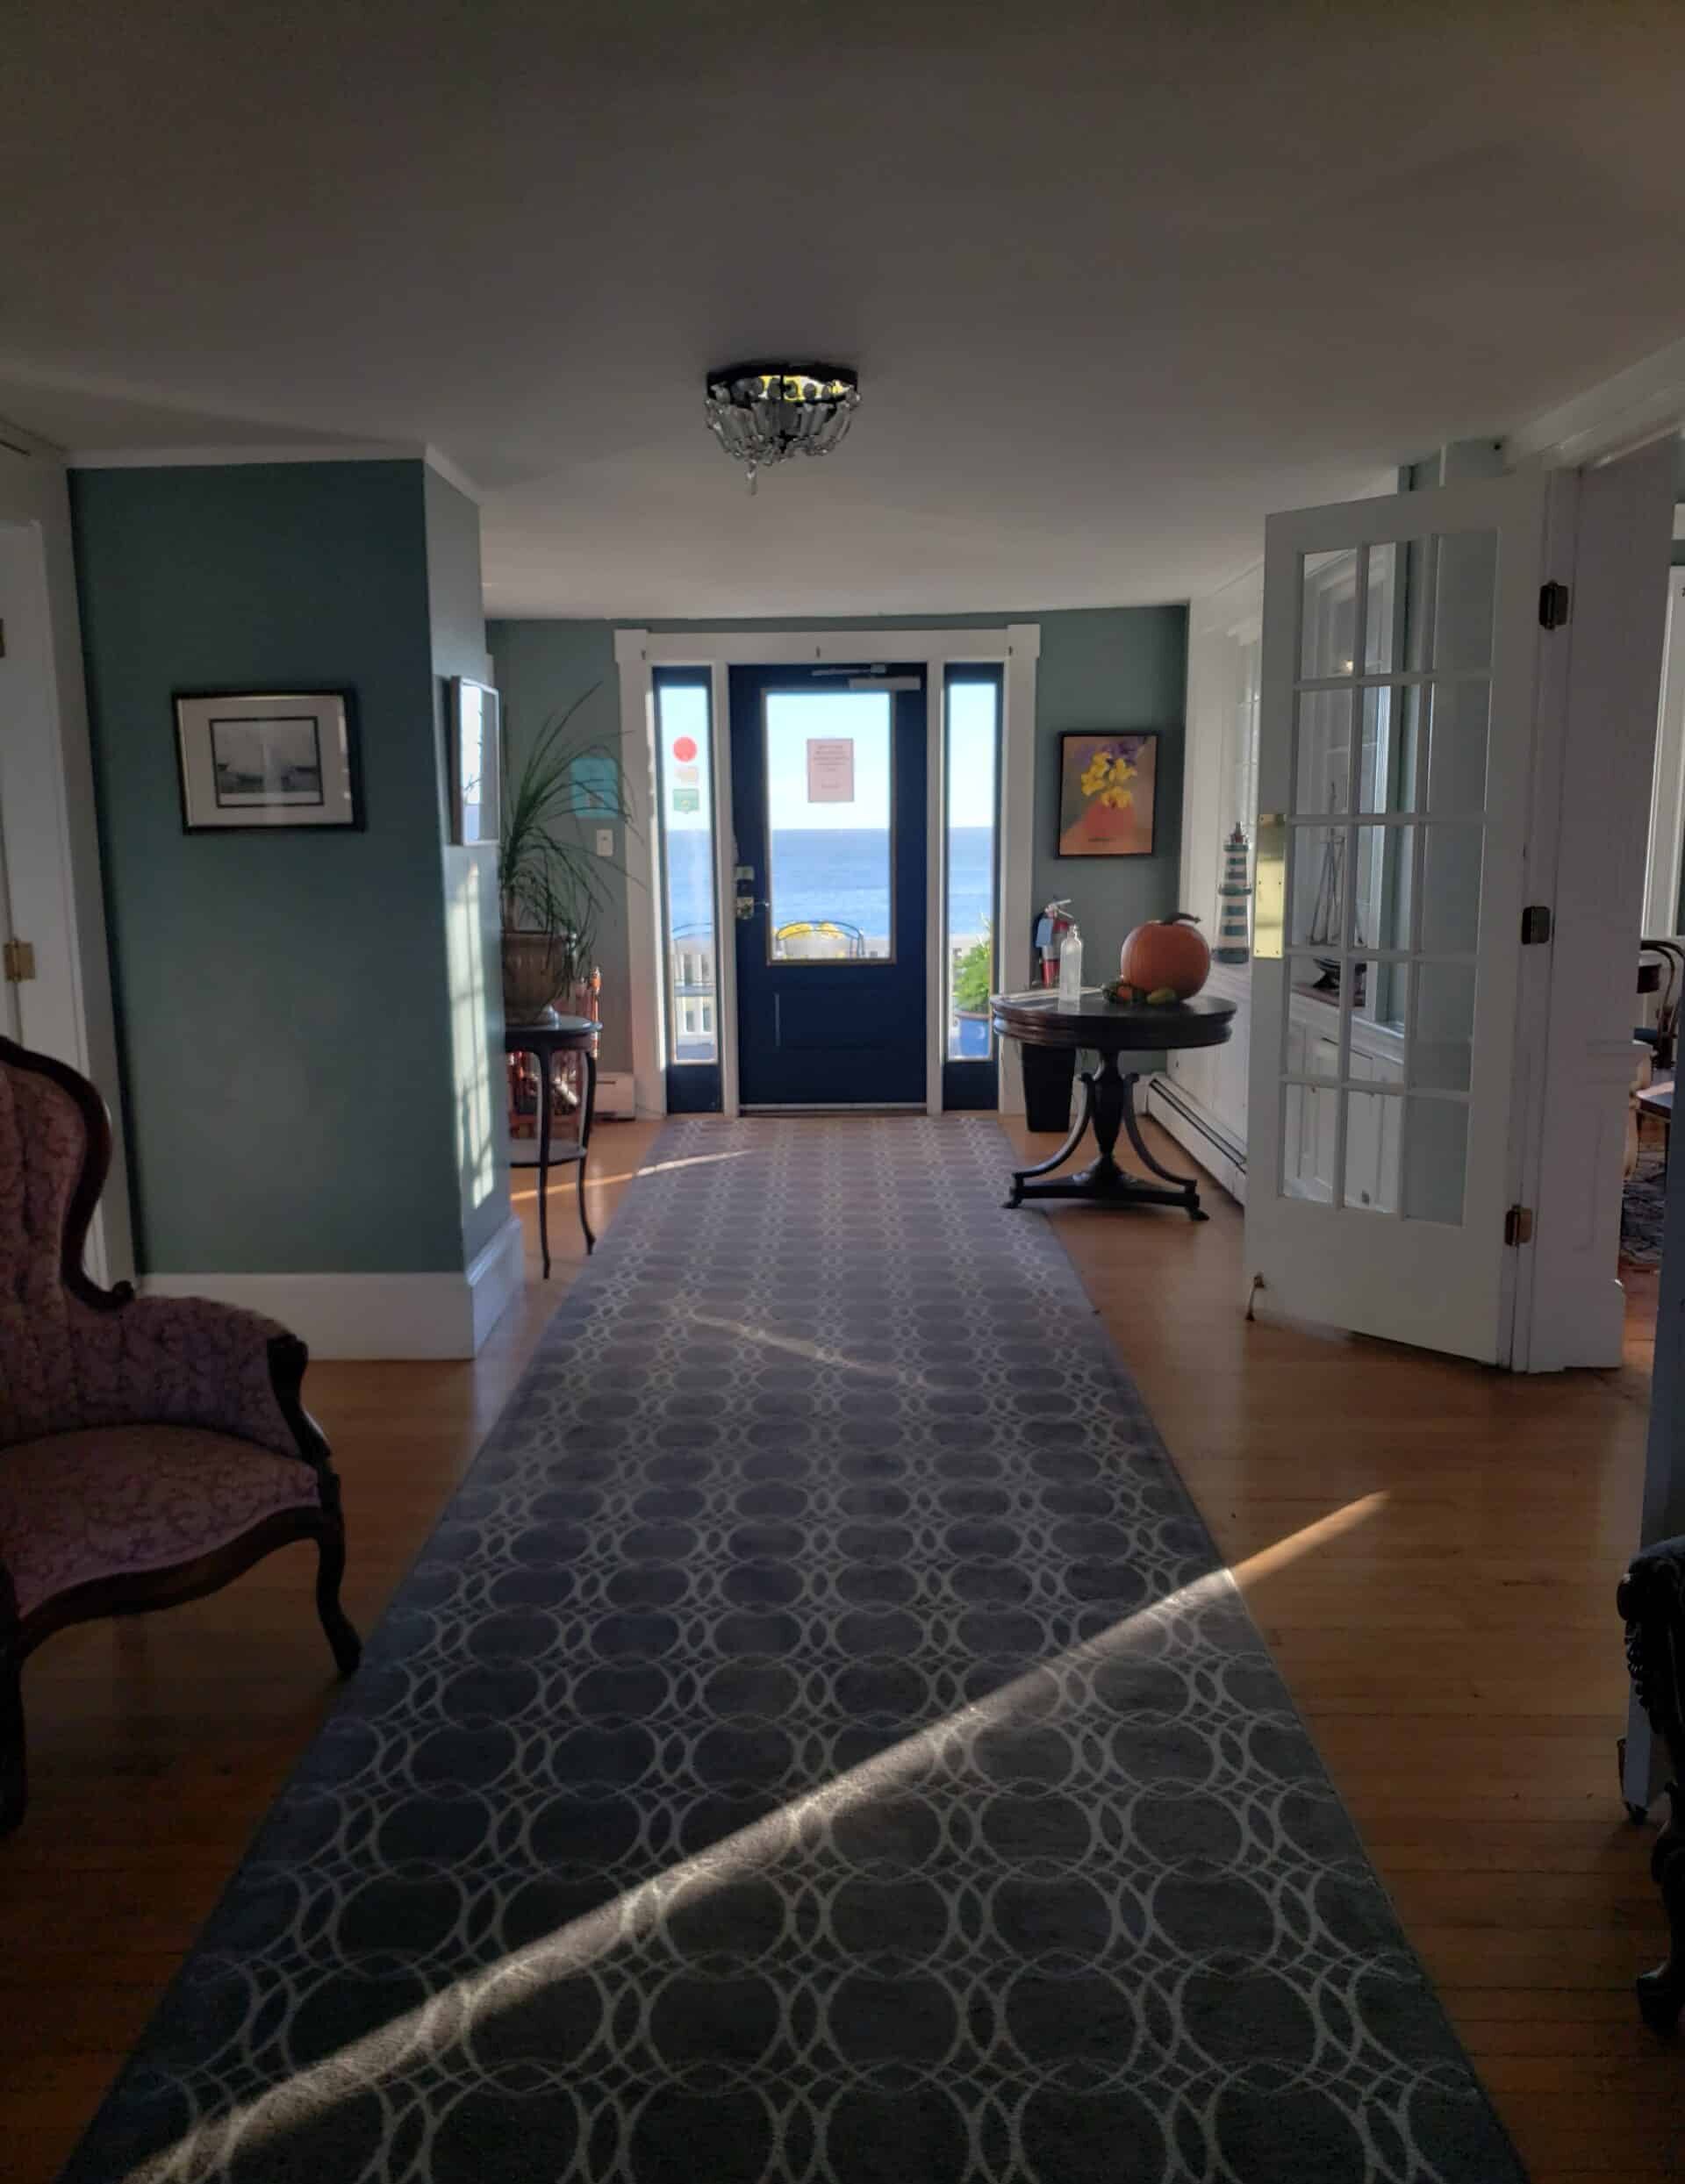 Entrance area to an in with a door that leads to a blue ocean. A blue carpet leads from the doorway.